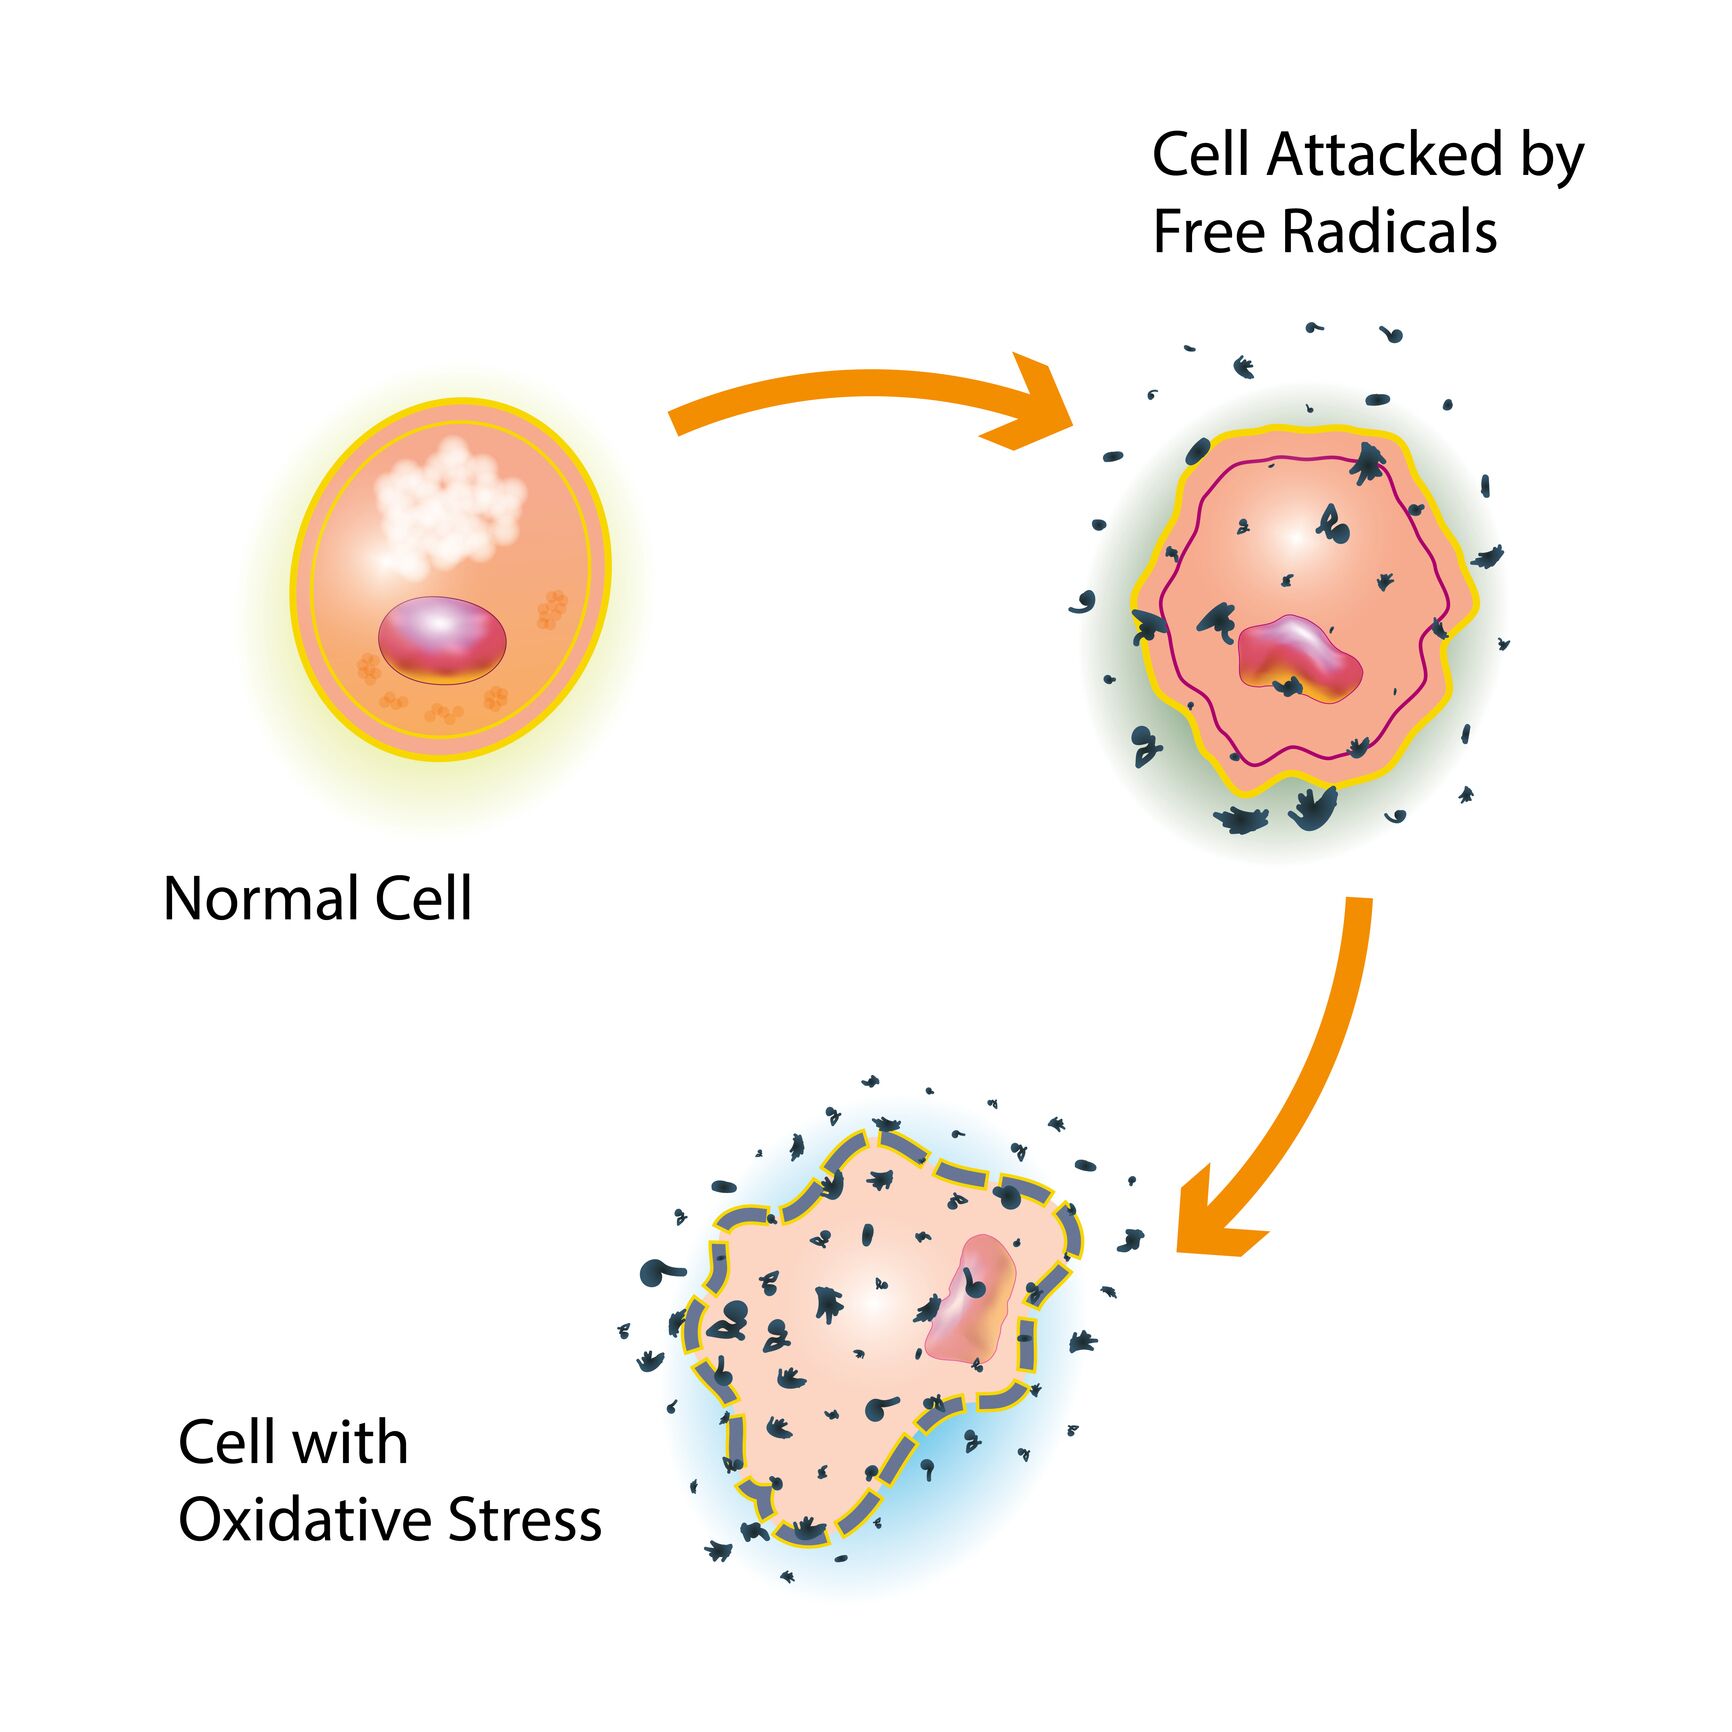 Graphic on how a normal cell gets attacked by free radicals, producing a cell with oxidative stress